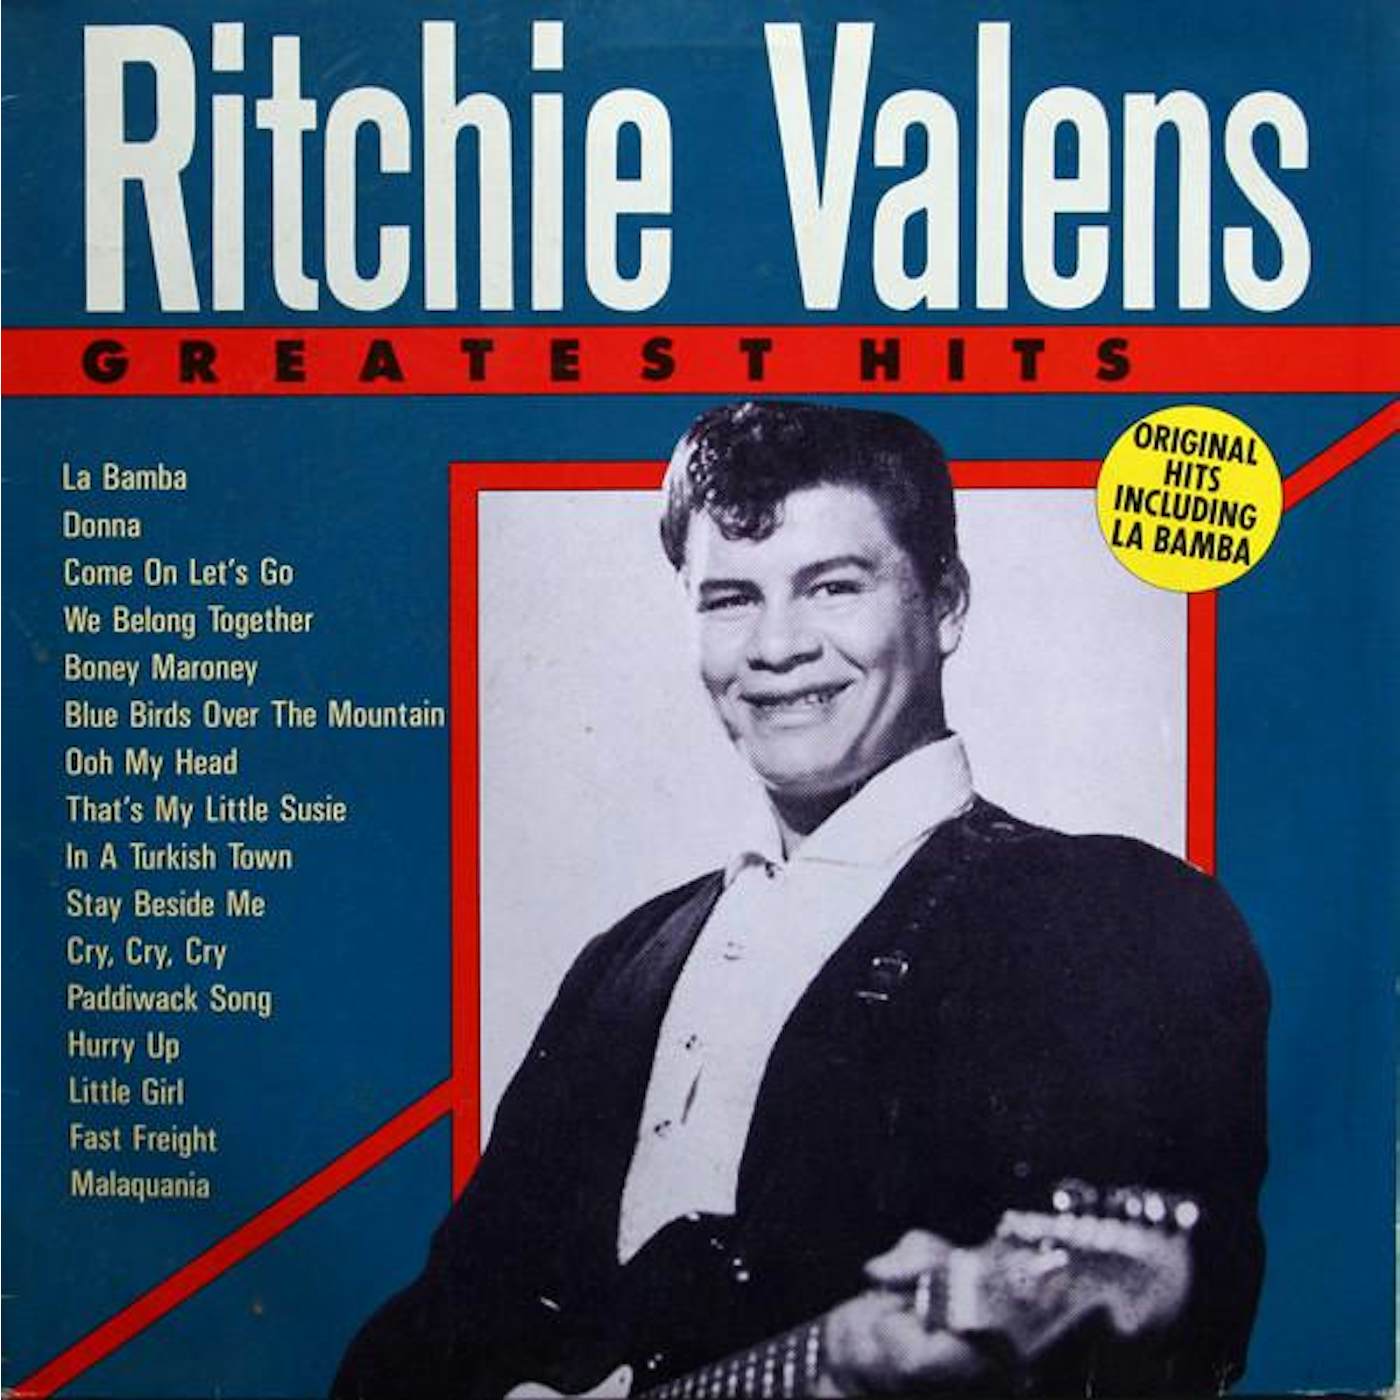 Ritchie Valens: The Hits Vinyl Record - Limited Edition, 180 Gram Pressing, Spain Release